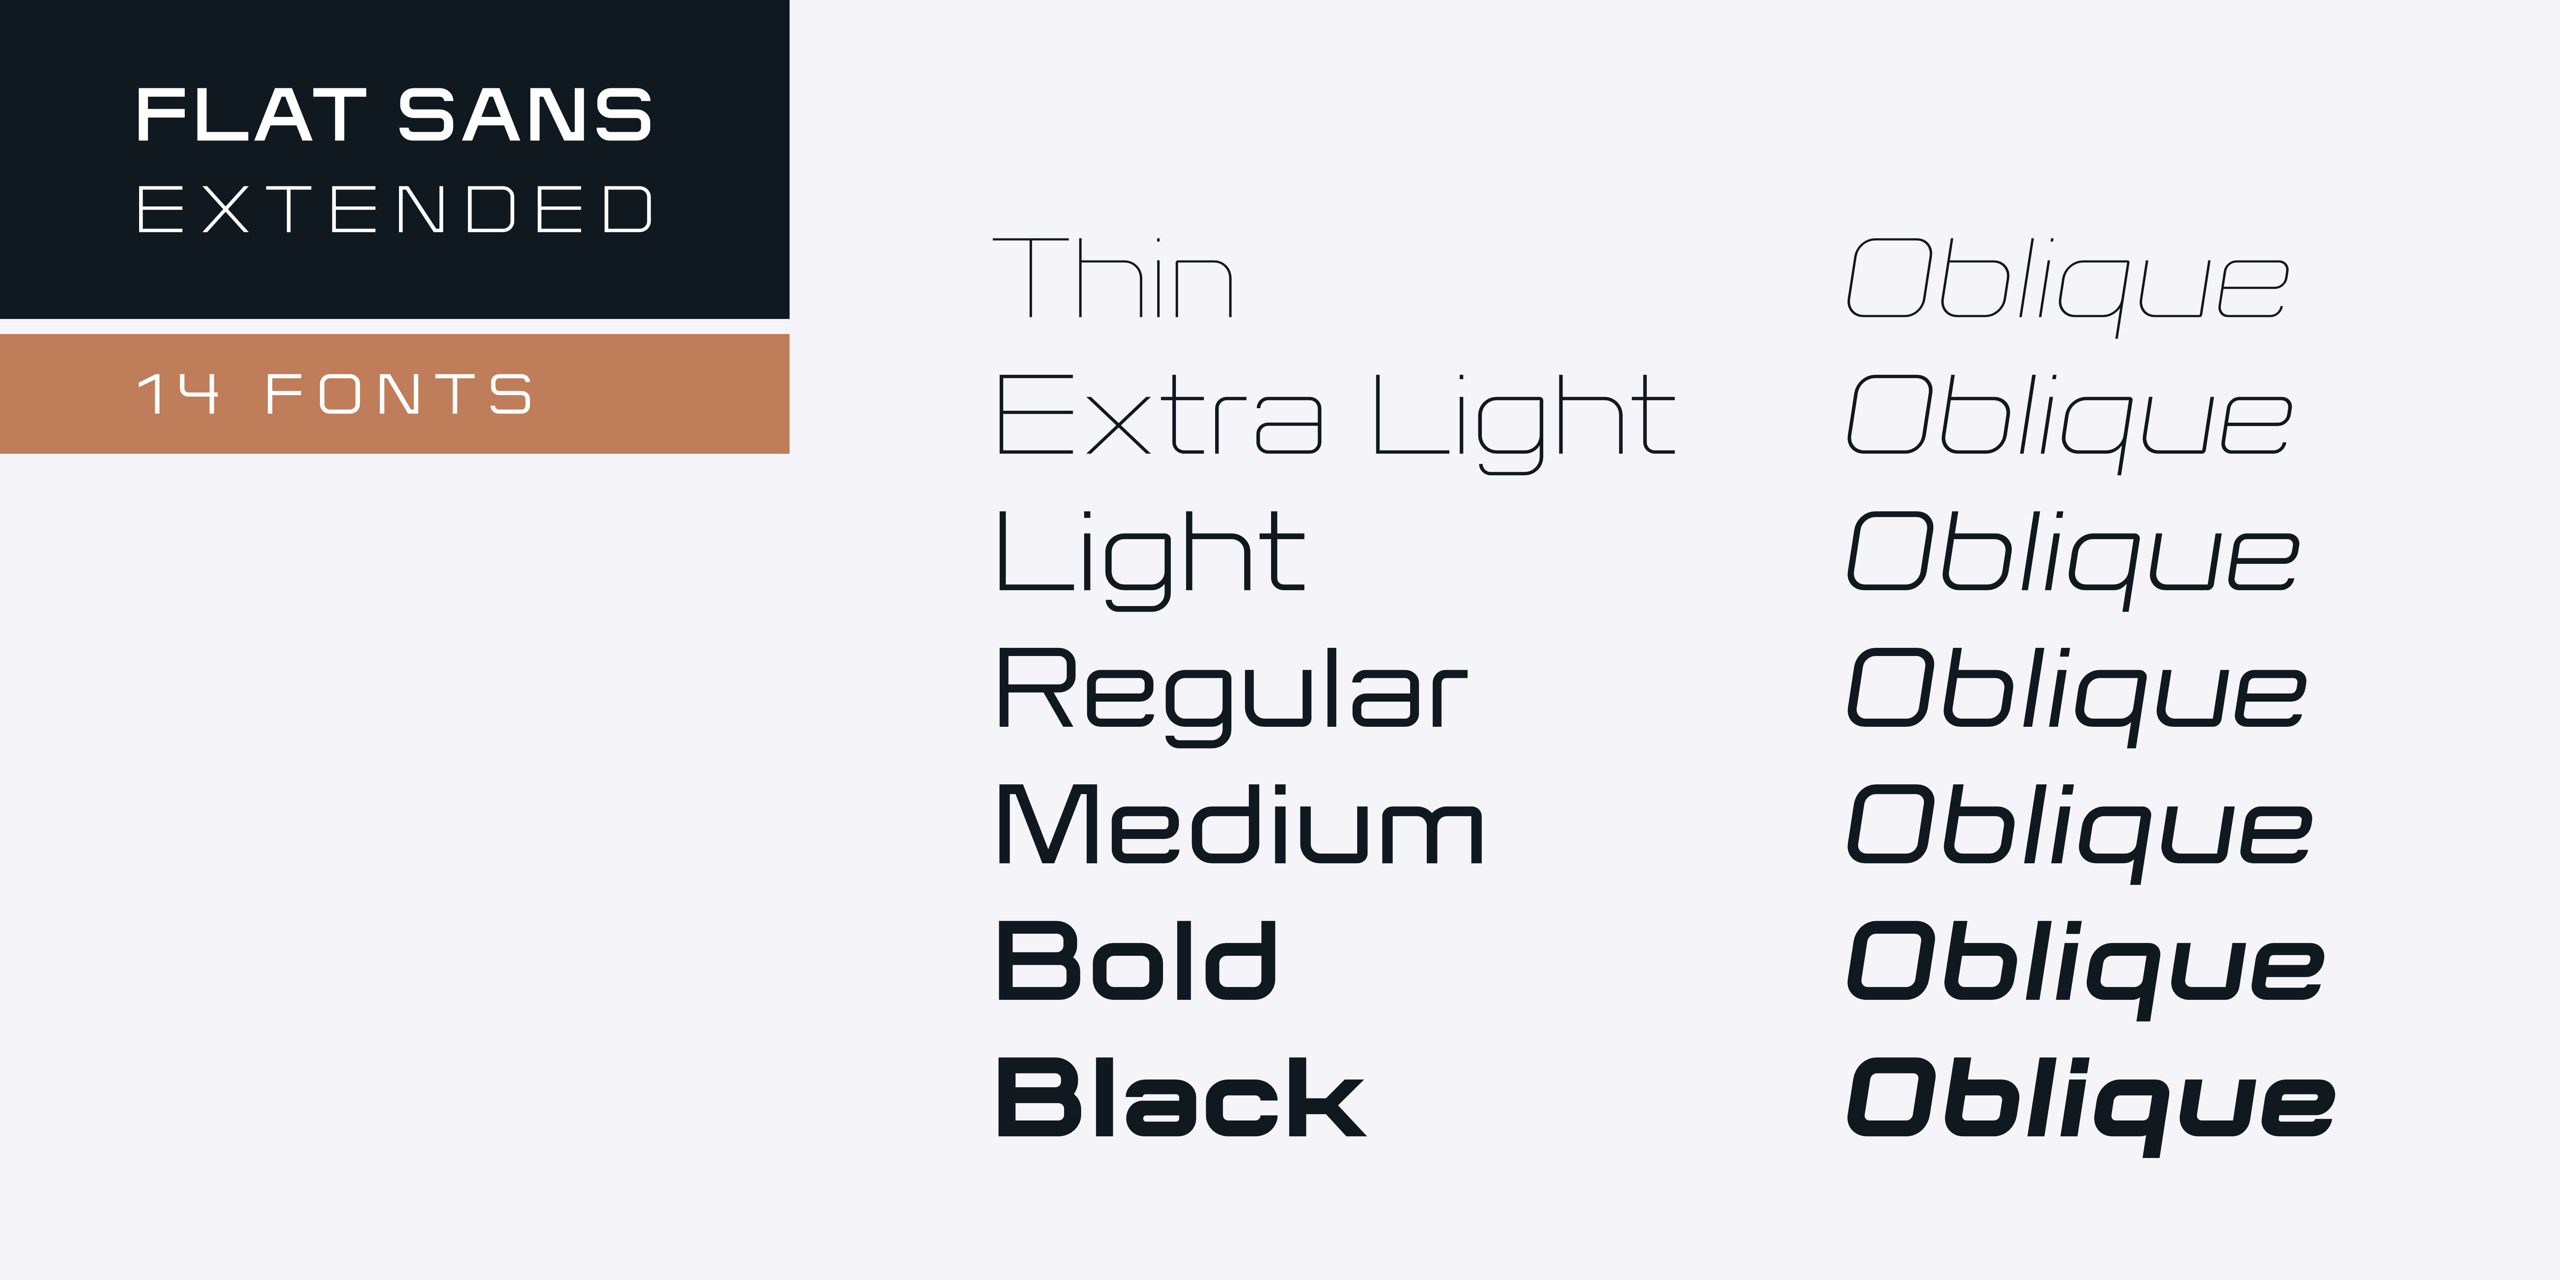 Flat Sans Extended fonts and styles